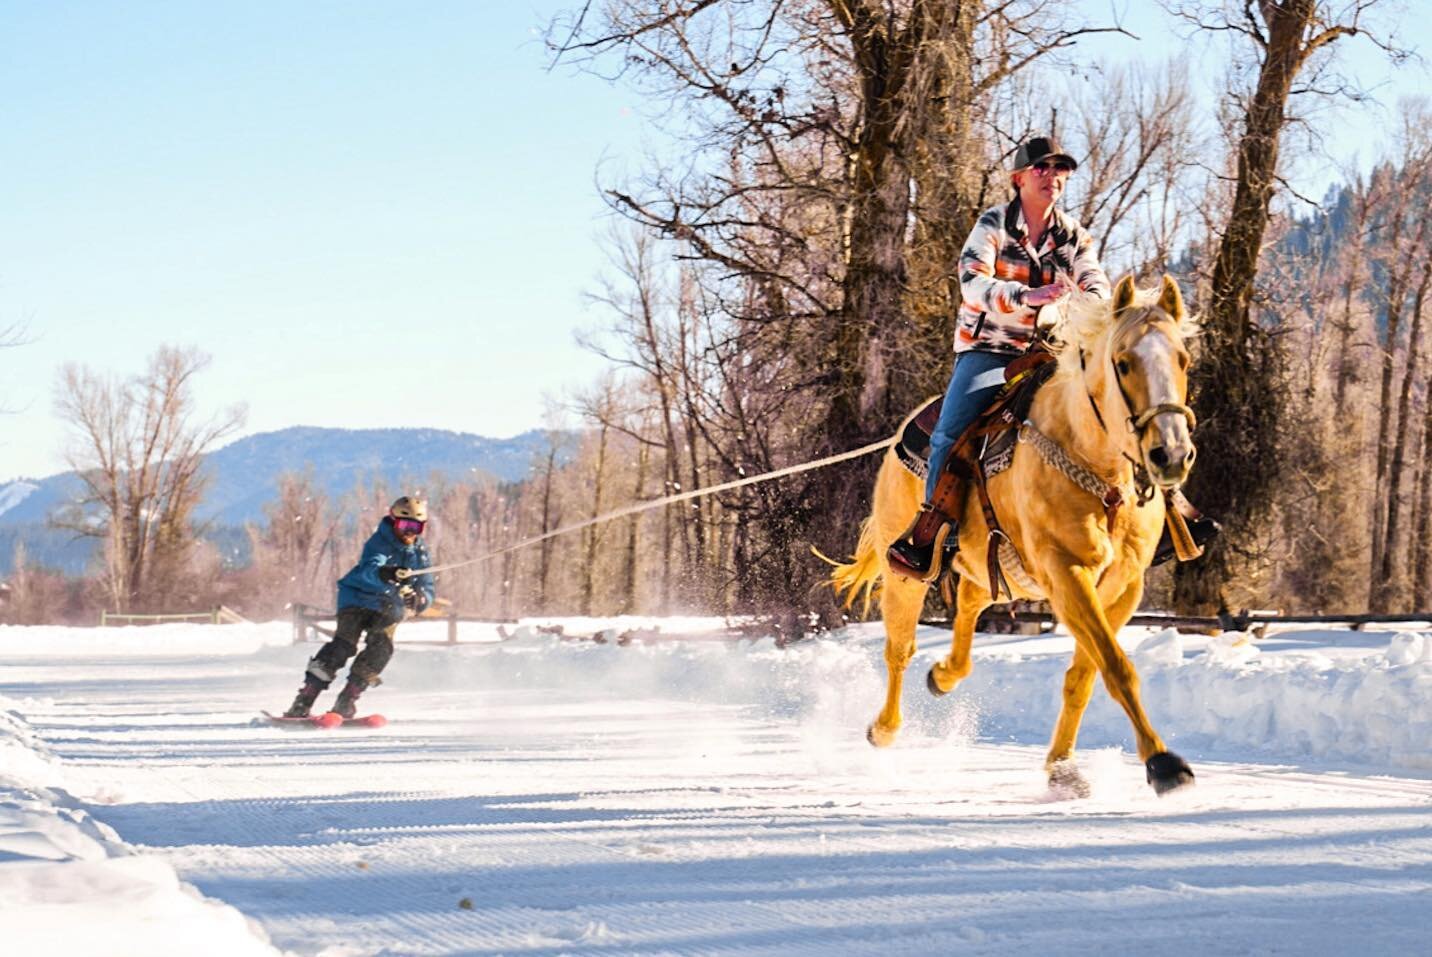 Interested in giving Skijoring a try? Well stay tuned, big things are coming from JH Outfitting Company soon! Link in bio for more info.

www.jhoutfittingcompany.com 

📸 credit: @yin_and_tonic 

#wyoming #bucketlist #mustdotravels #jackson #skijorin